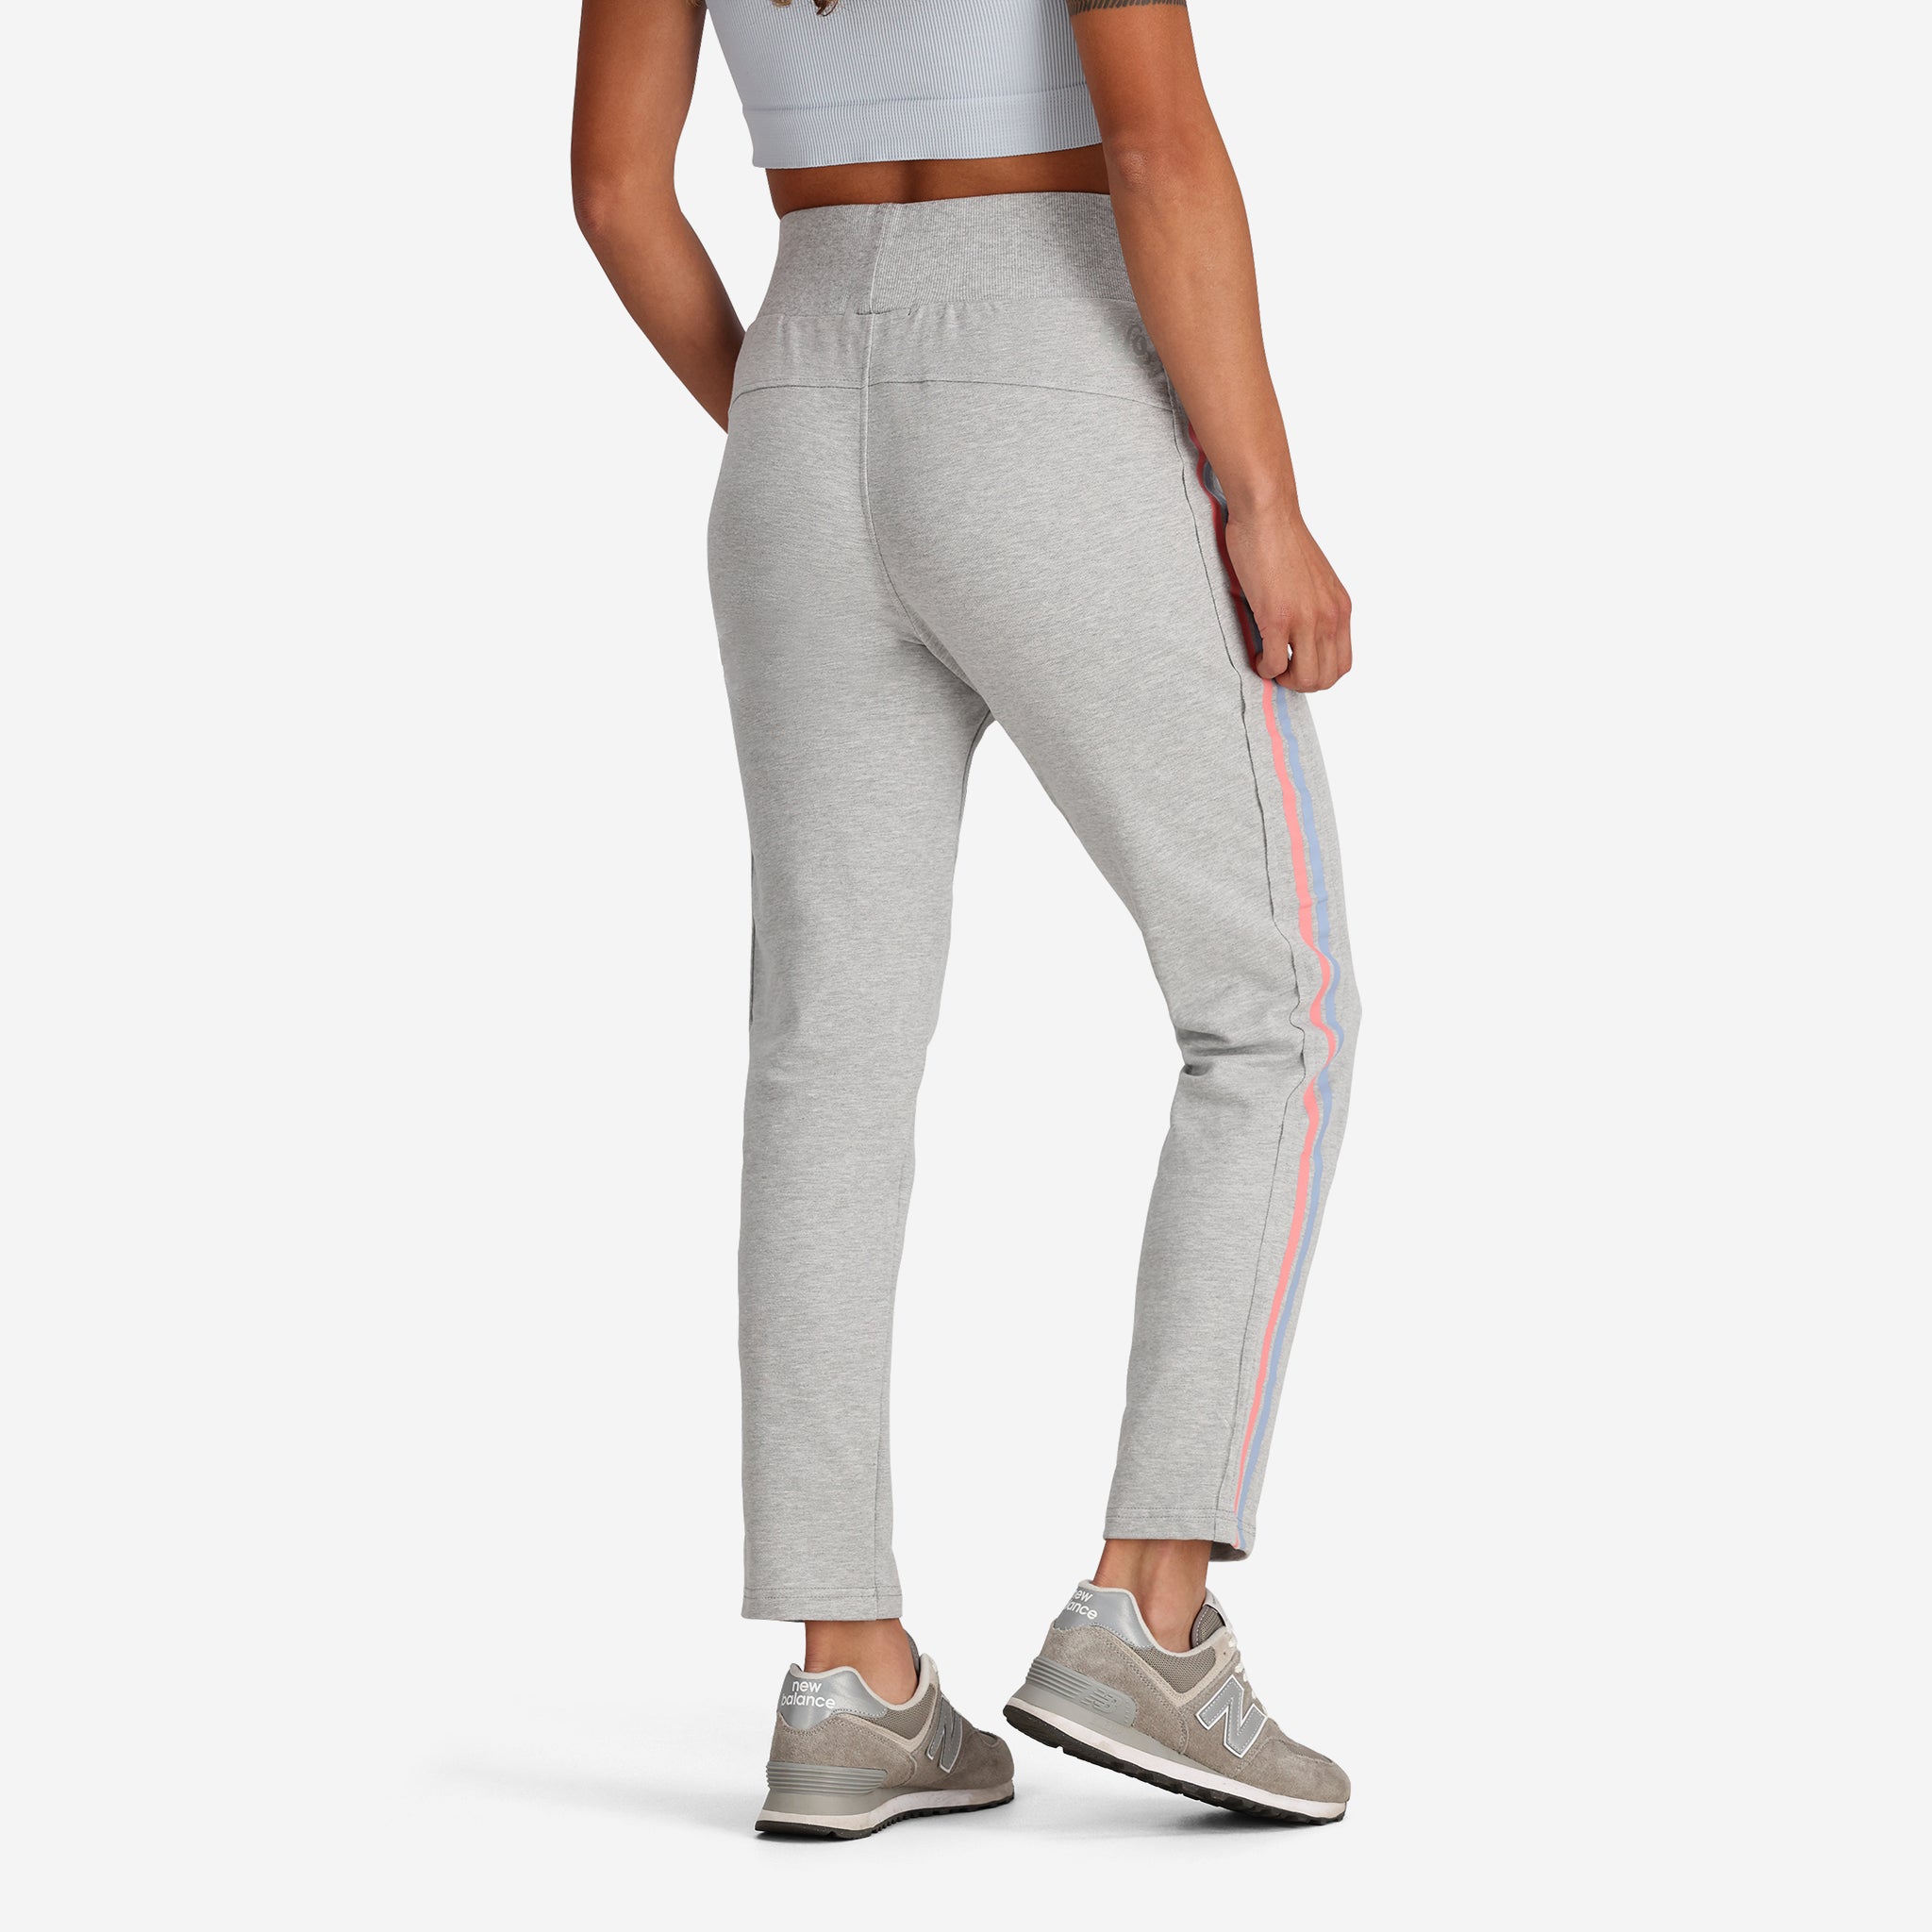 Looker Fitted Jogger in Heather Grey - FINAL SALE